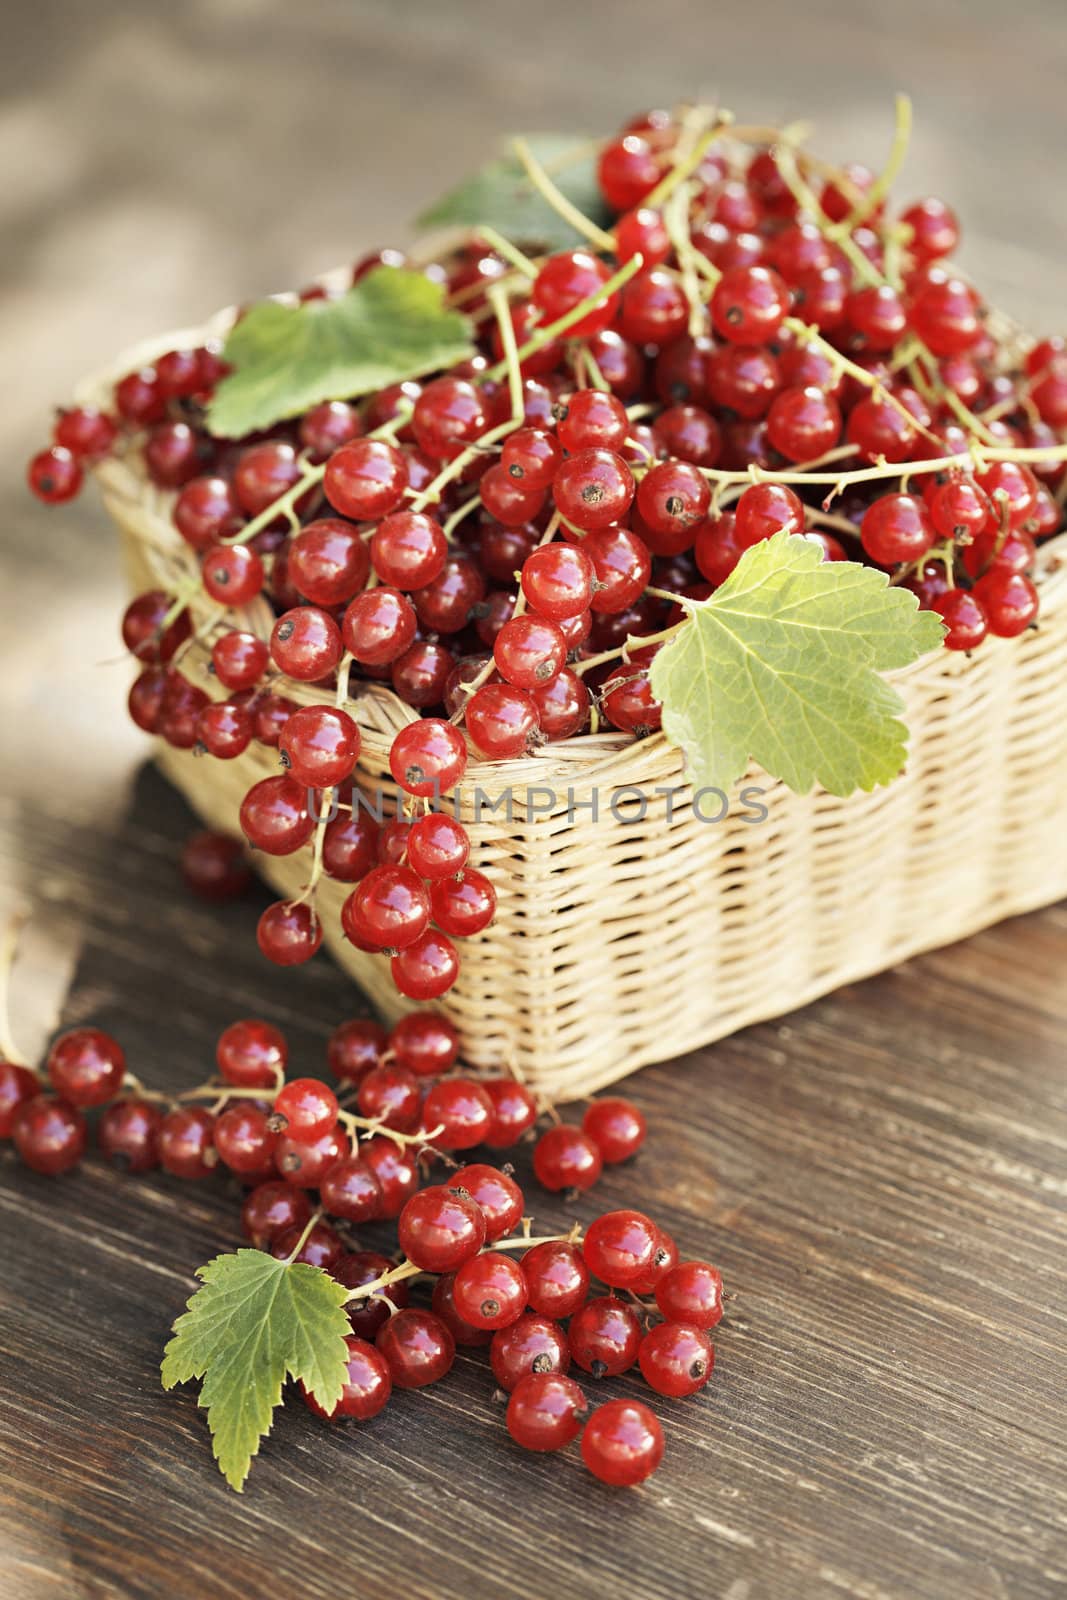 Harvested red currant berries in a small basket